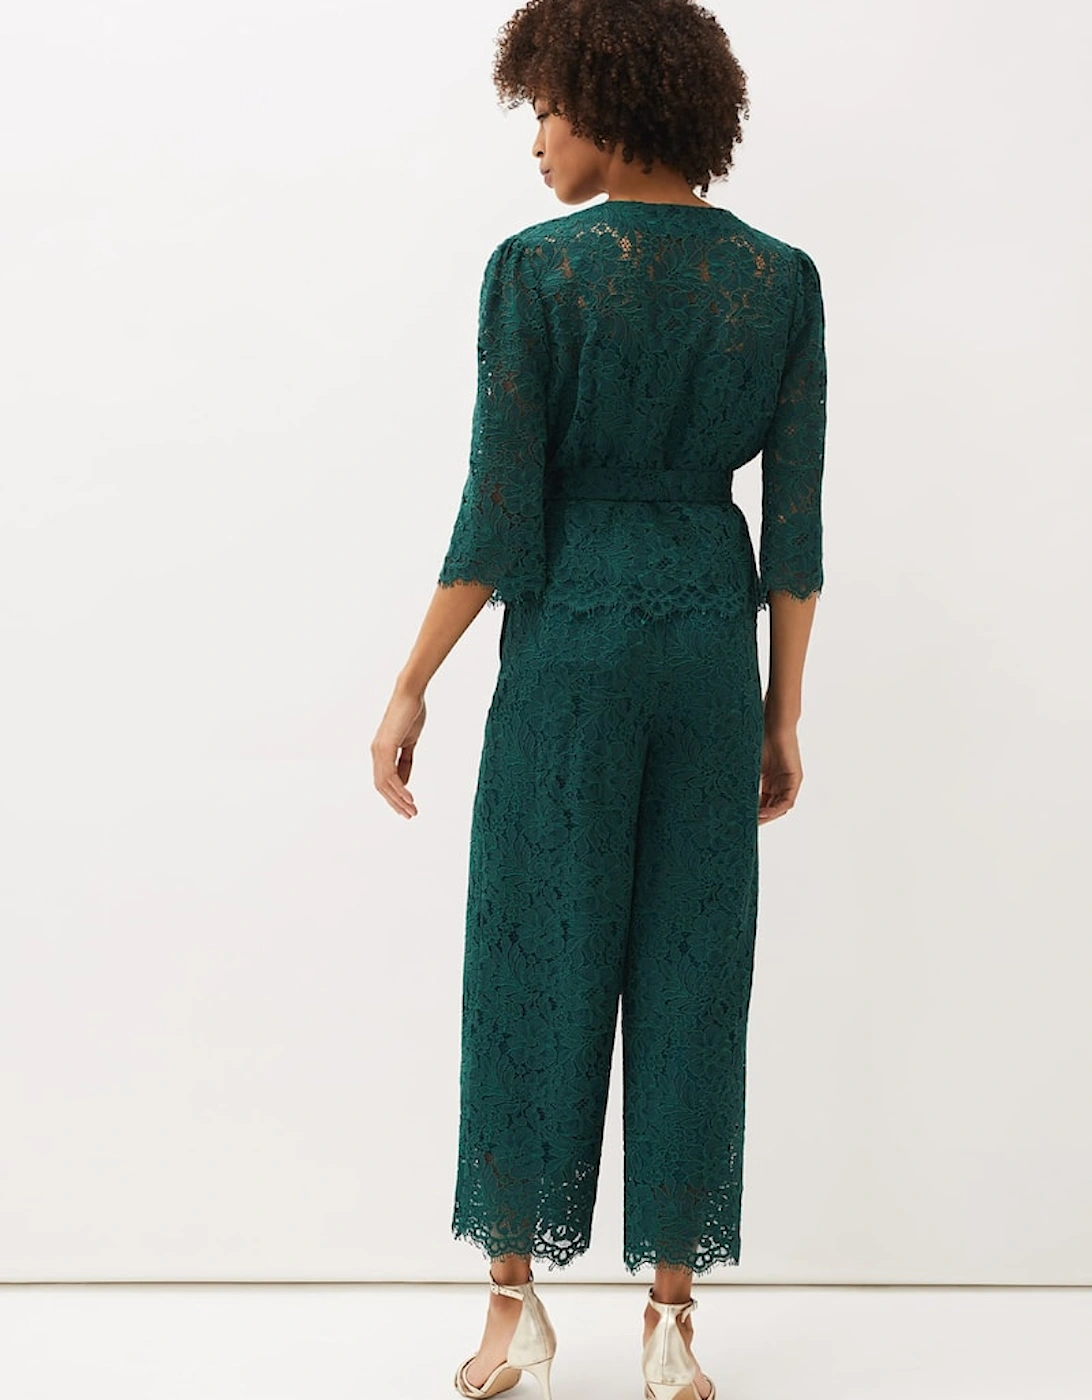 Aliza Lace Co-ord Trousers